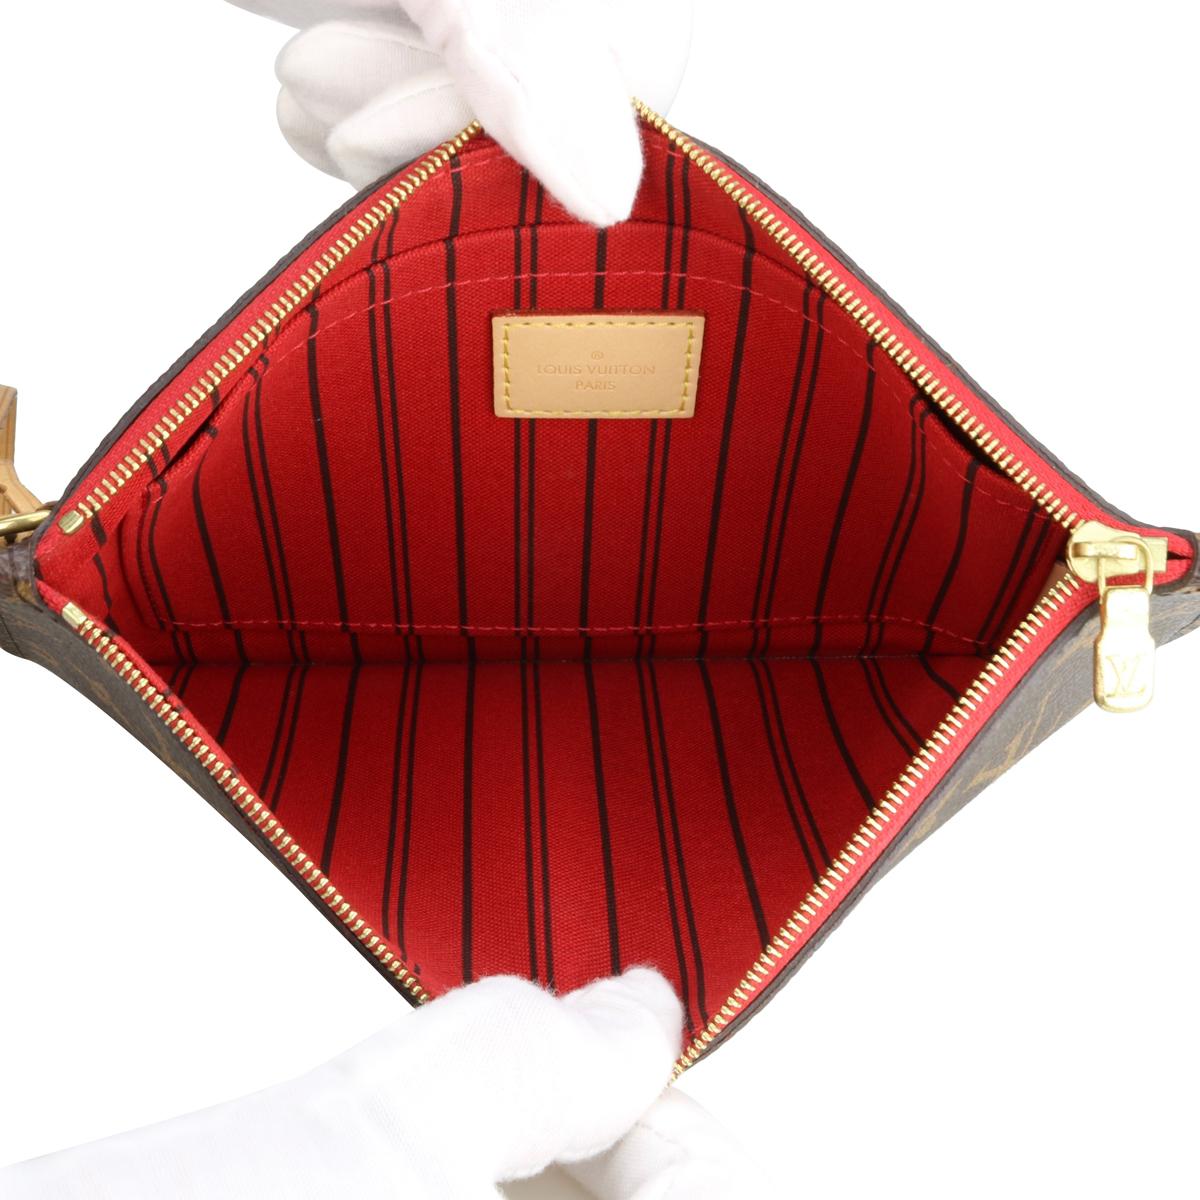 Louis Vuitton Neverfull MM Pochette Pouch in Monogram with Red Interior 2019 9